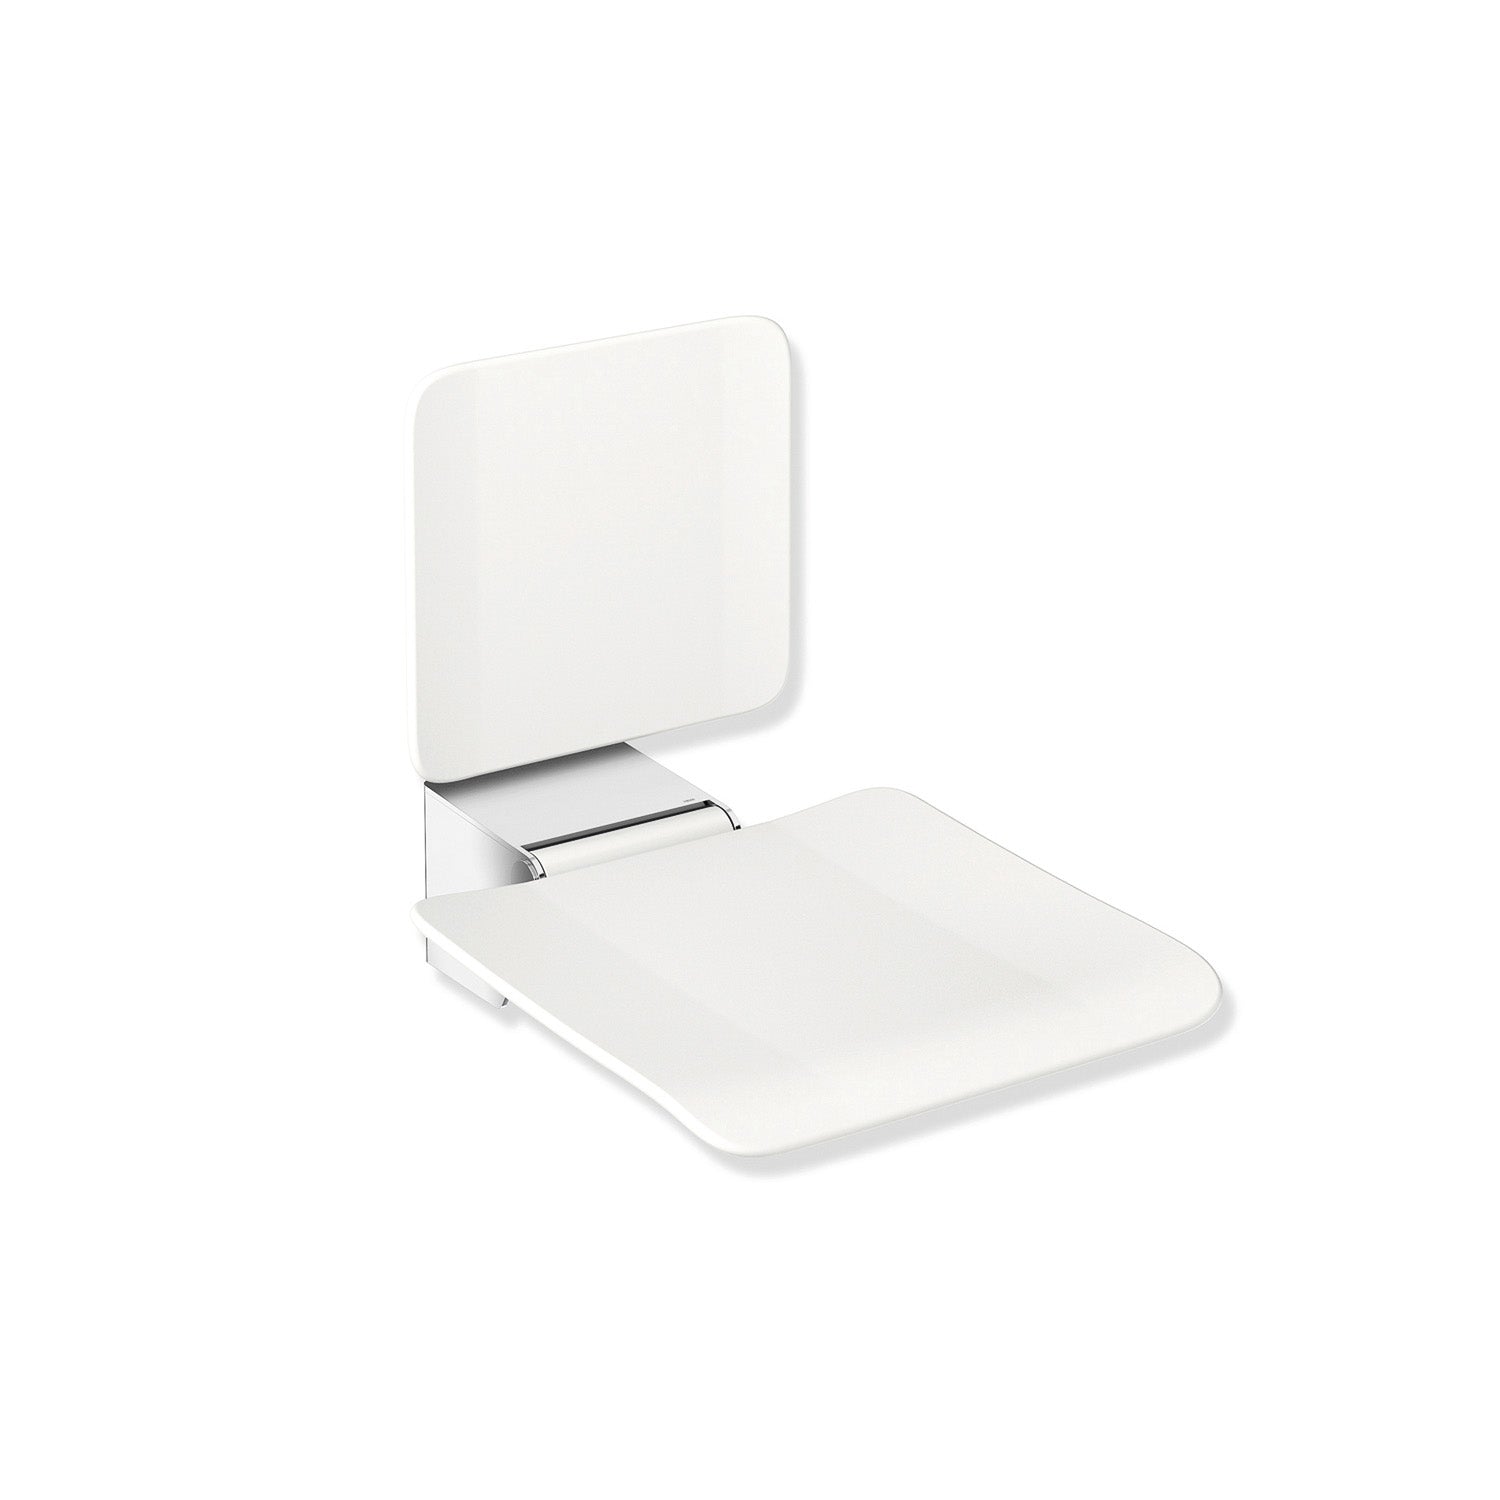 Freestyle Fixed Shower Seat with a Backrest in a white seat and chrome finish bracket on a white background